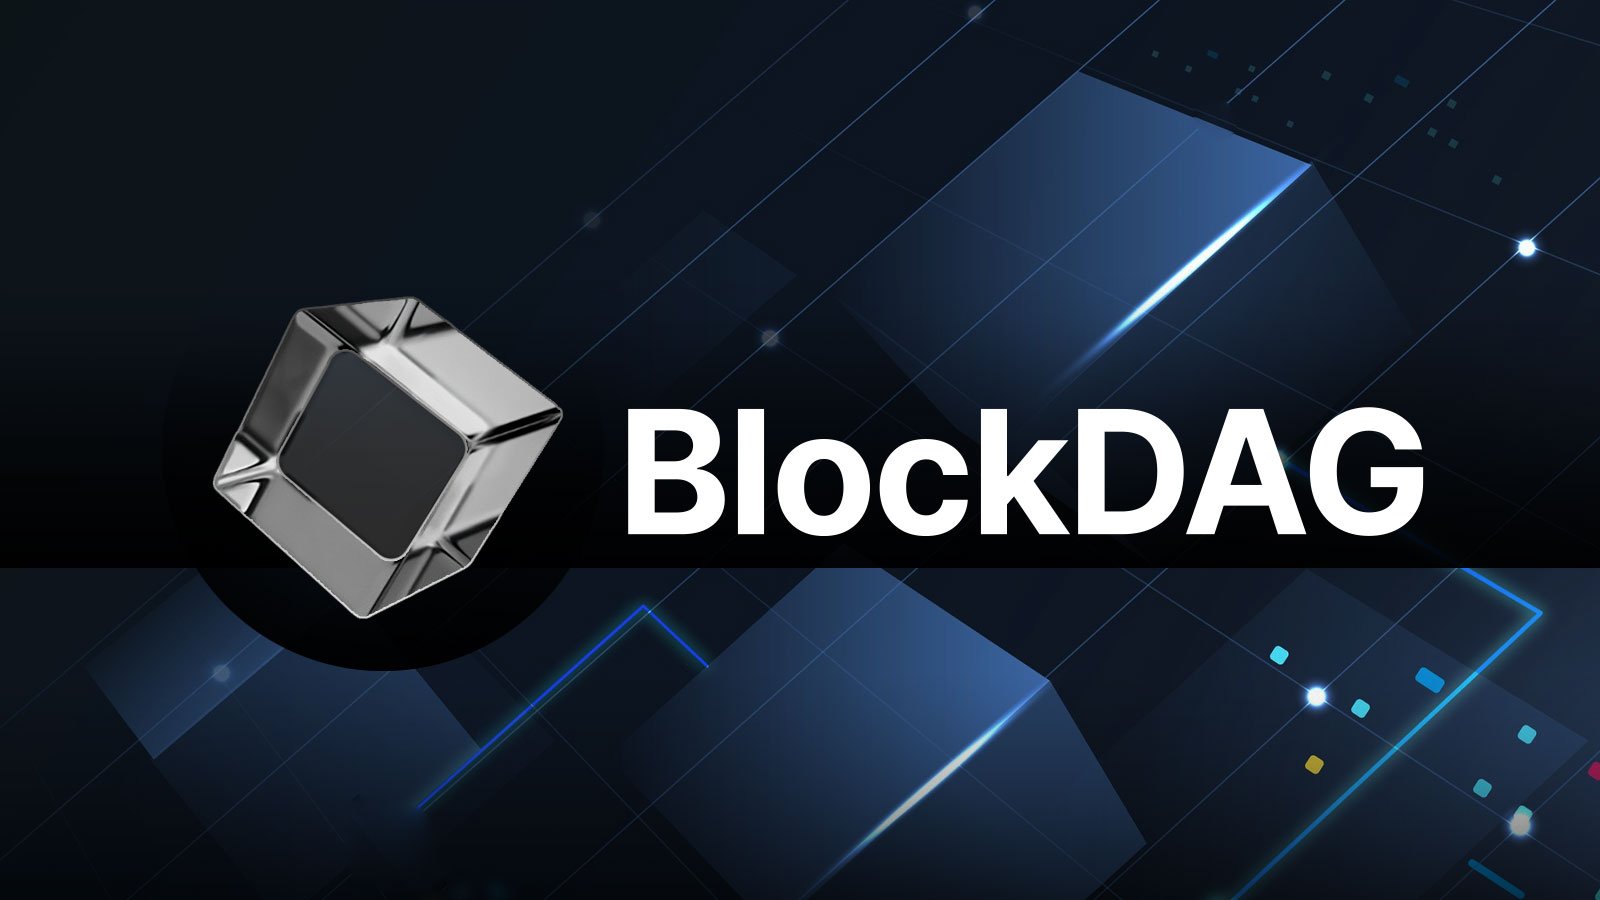 BlockDAG (BDAG) Token Pre-Sale Spotlighted by Enthusiasts in February as Polygon (MATIC) and Solana (SOL) Top Altcoins Set New Goals